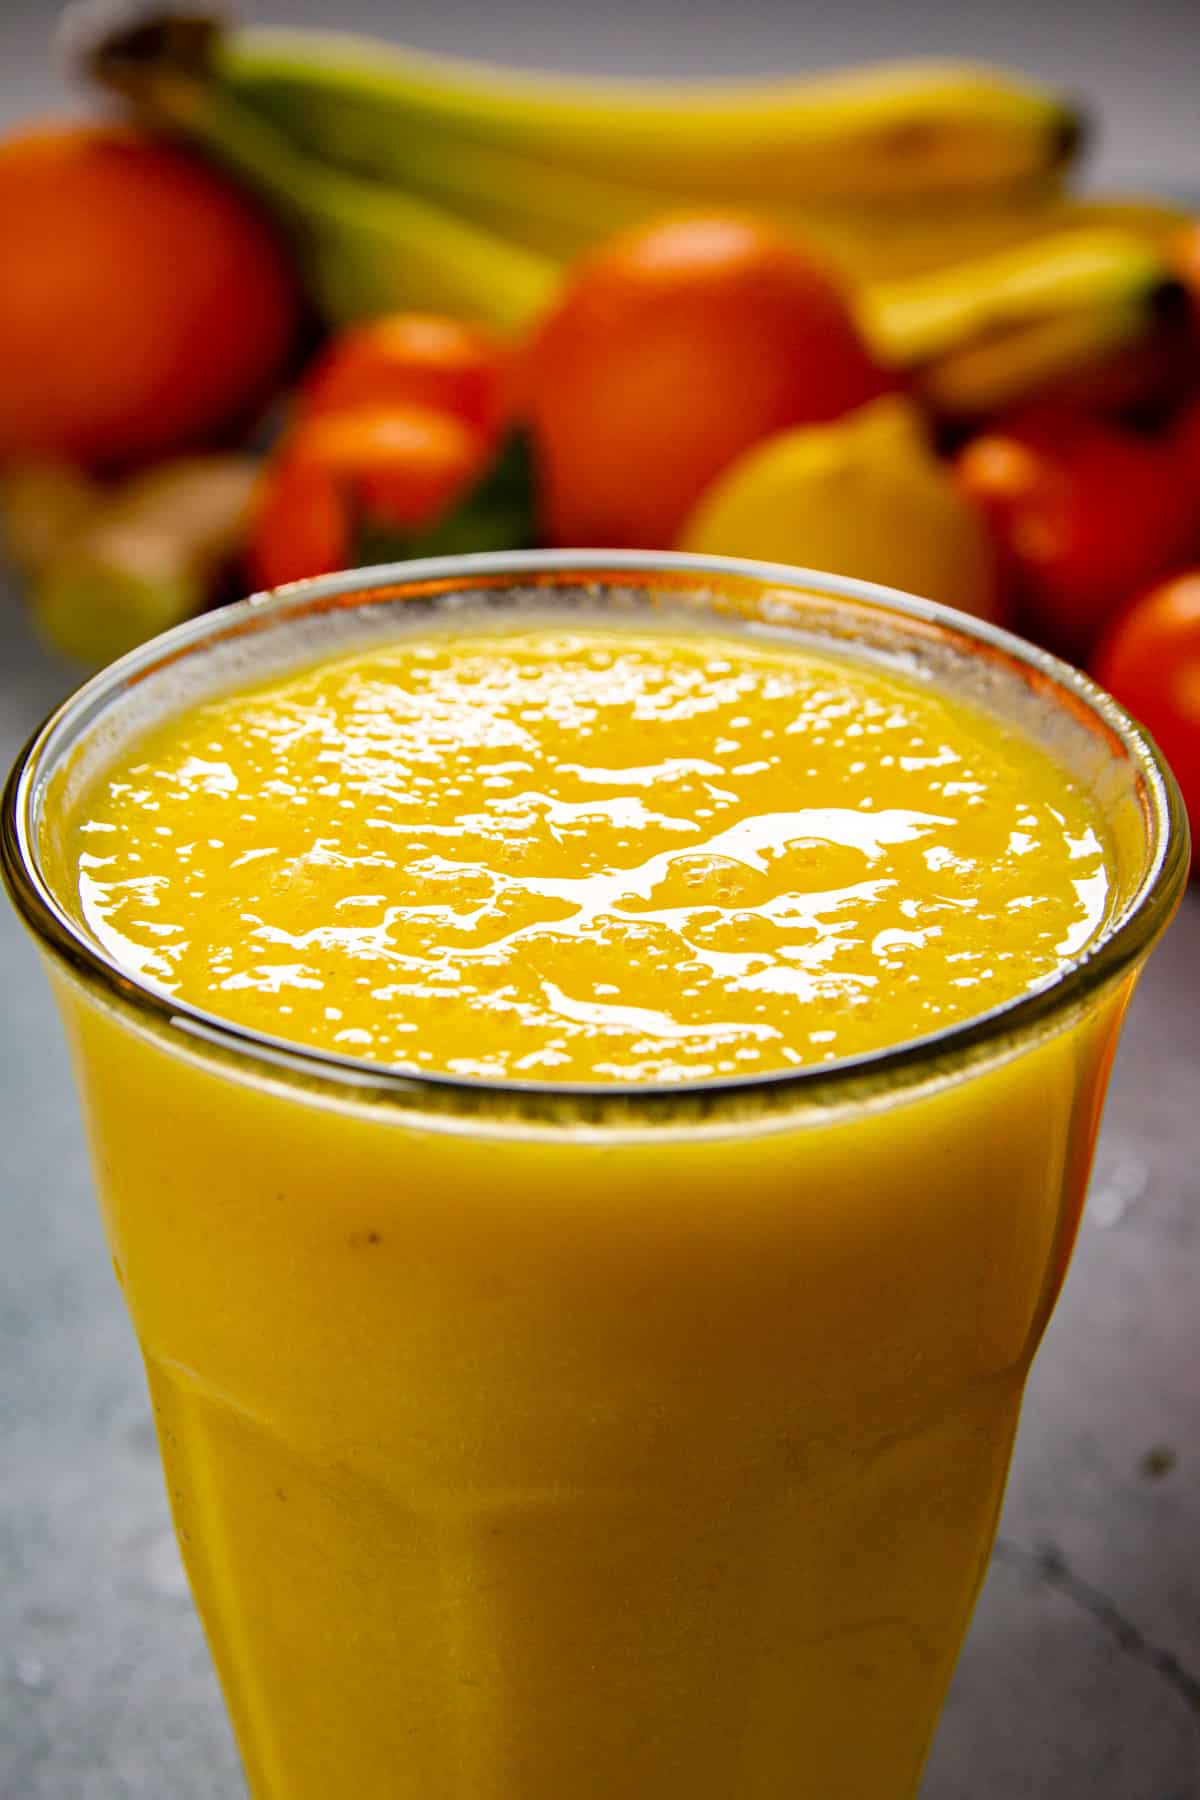 A close up of the banana mango smoothie in a tall glass.